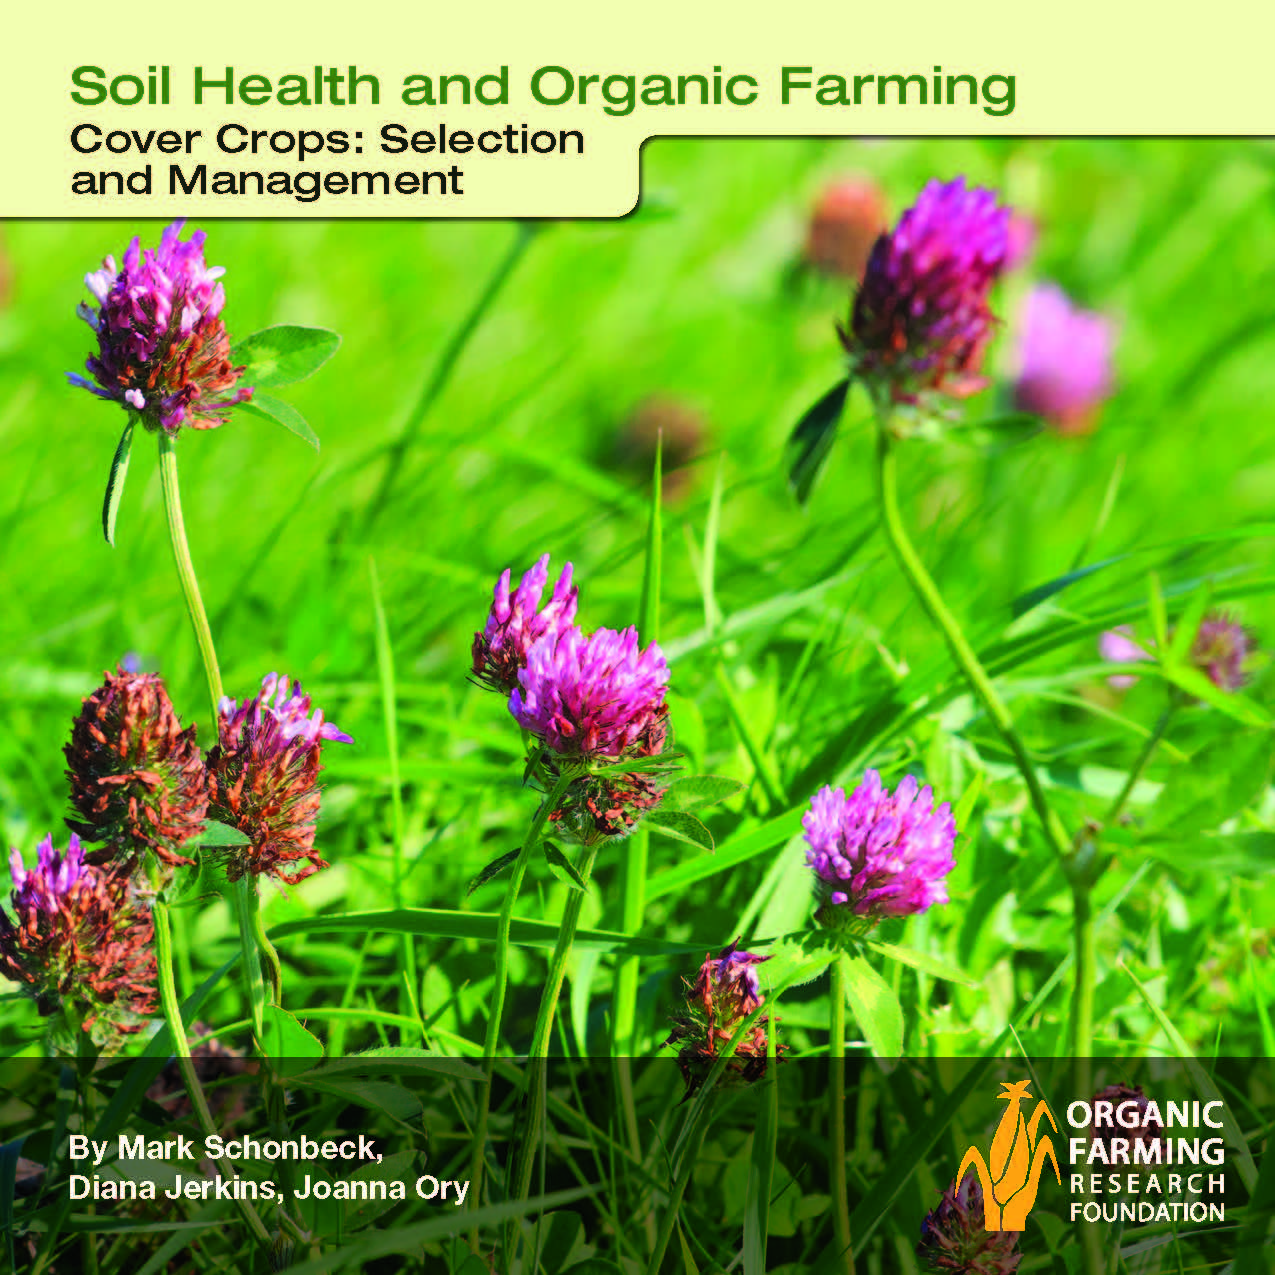 OFRF-Soil Health and Organic Farming-Cover Crops: Selection and Management